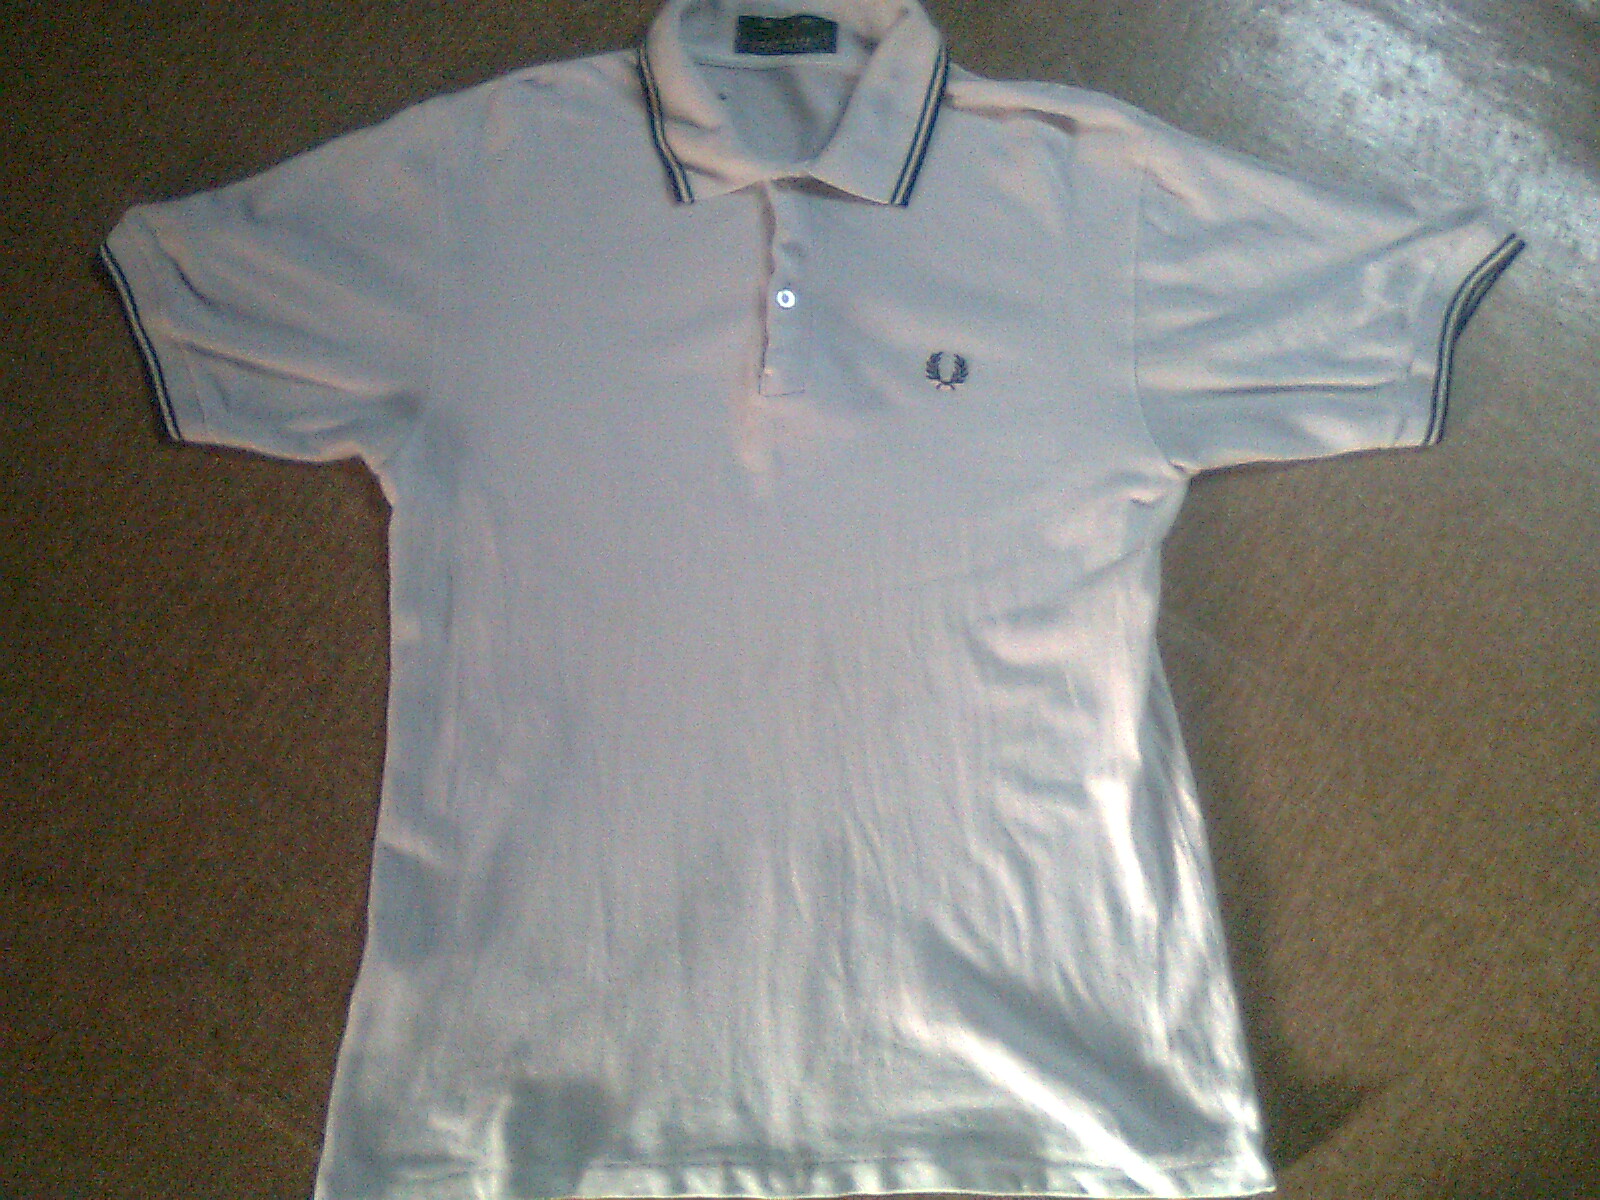 STYLOBUNDLE: FRED PERRY POLO SHIRT(SOLD)